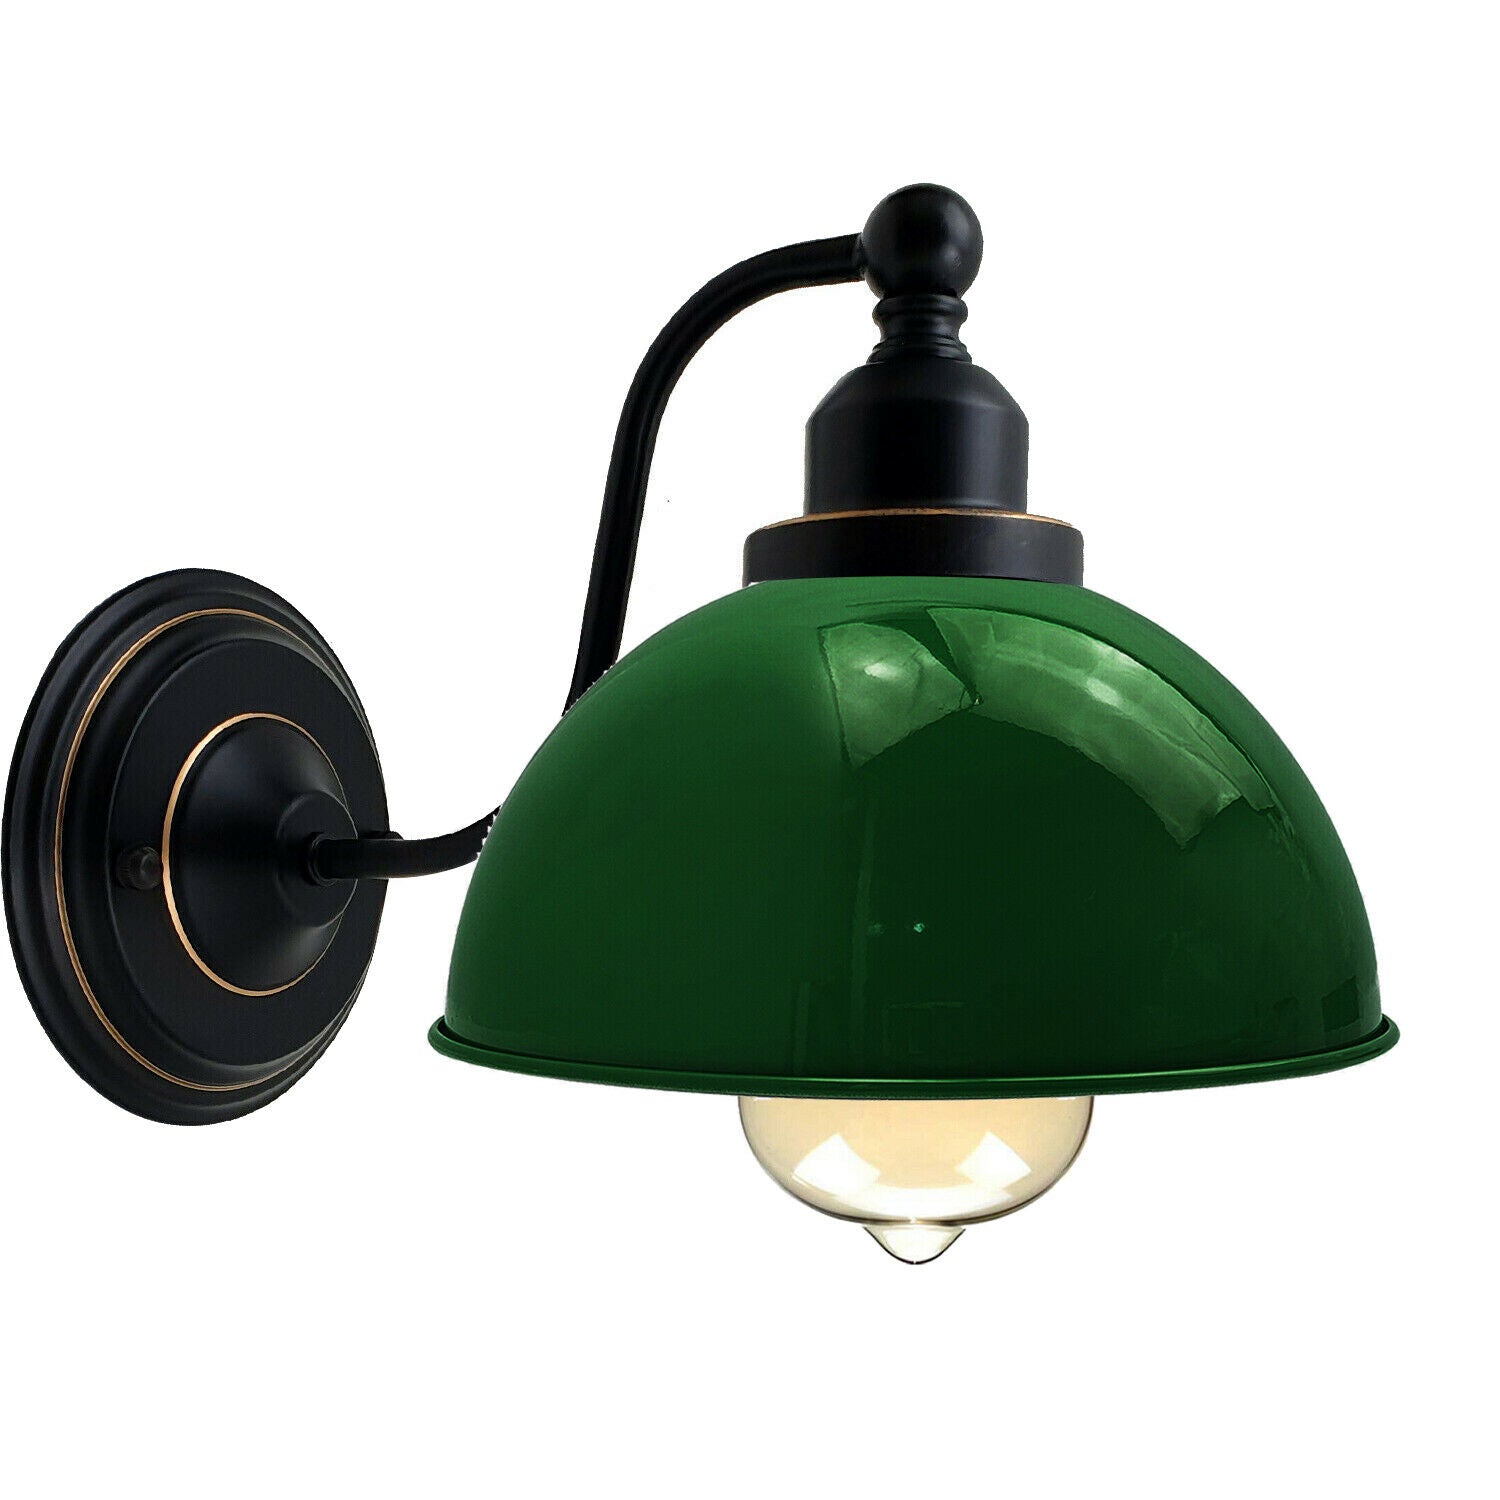 industrial vintage retro green wall sconces e27 uk holders